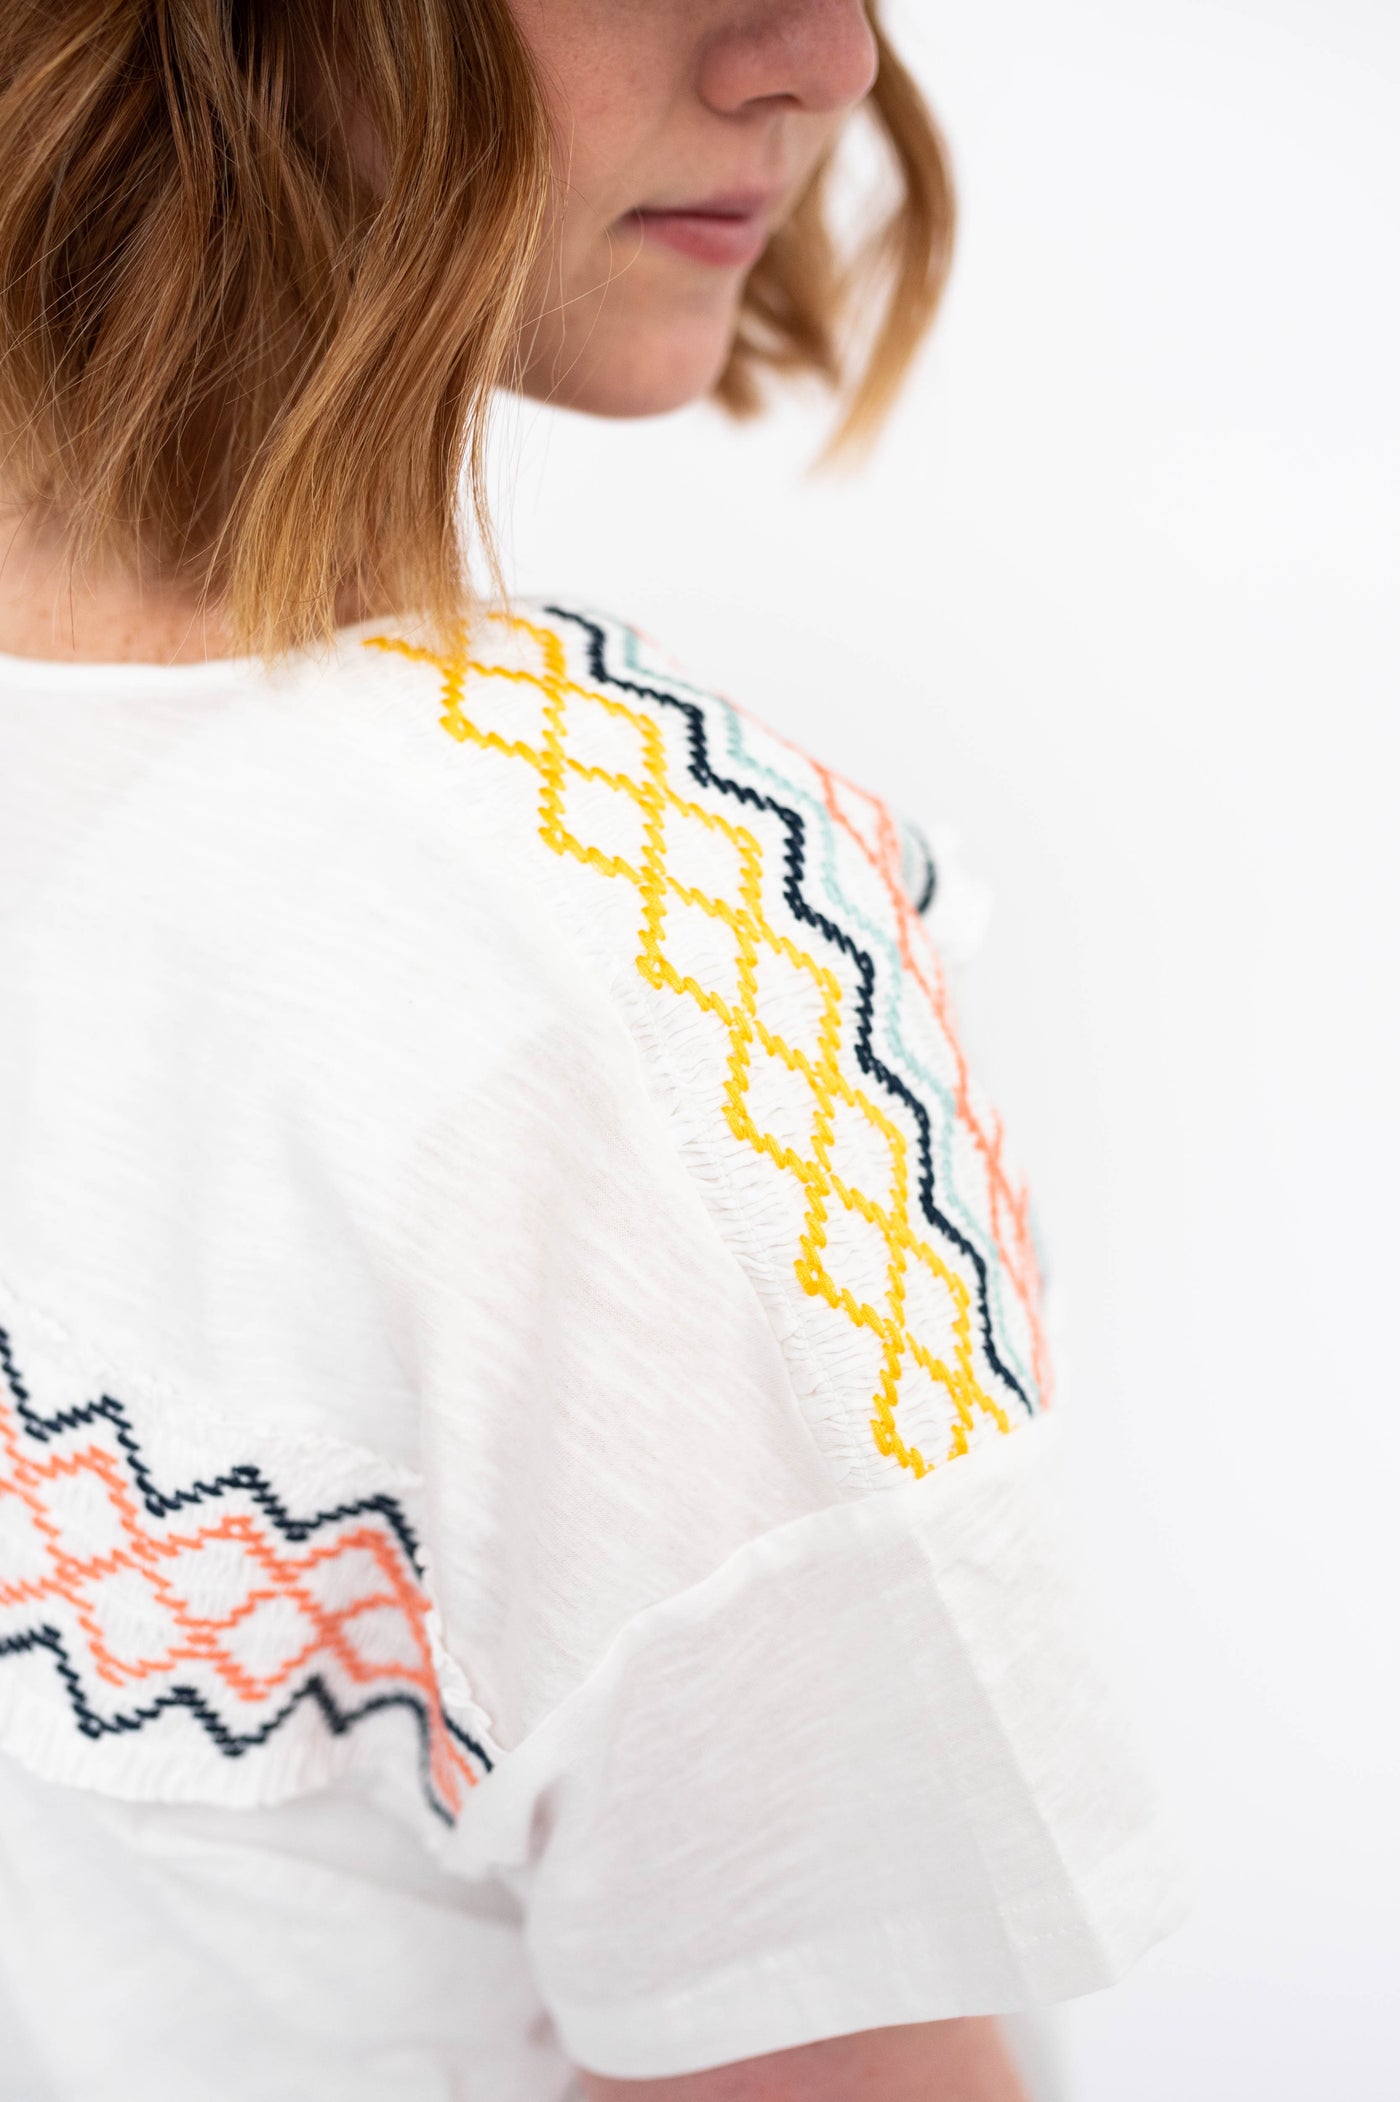 Pattern design on the sleeve of a white top